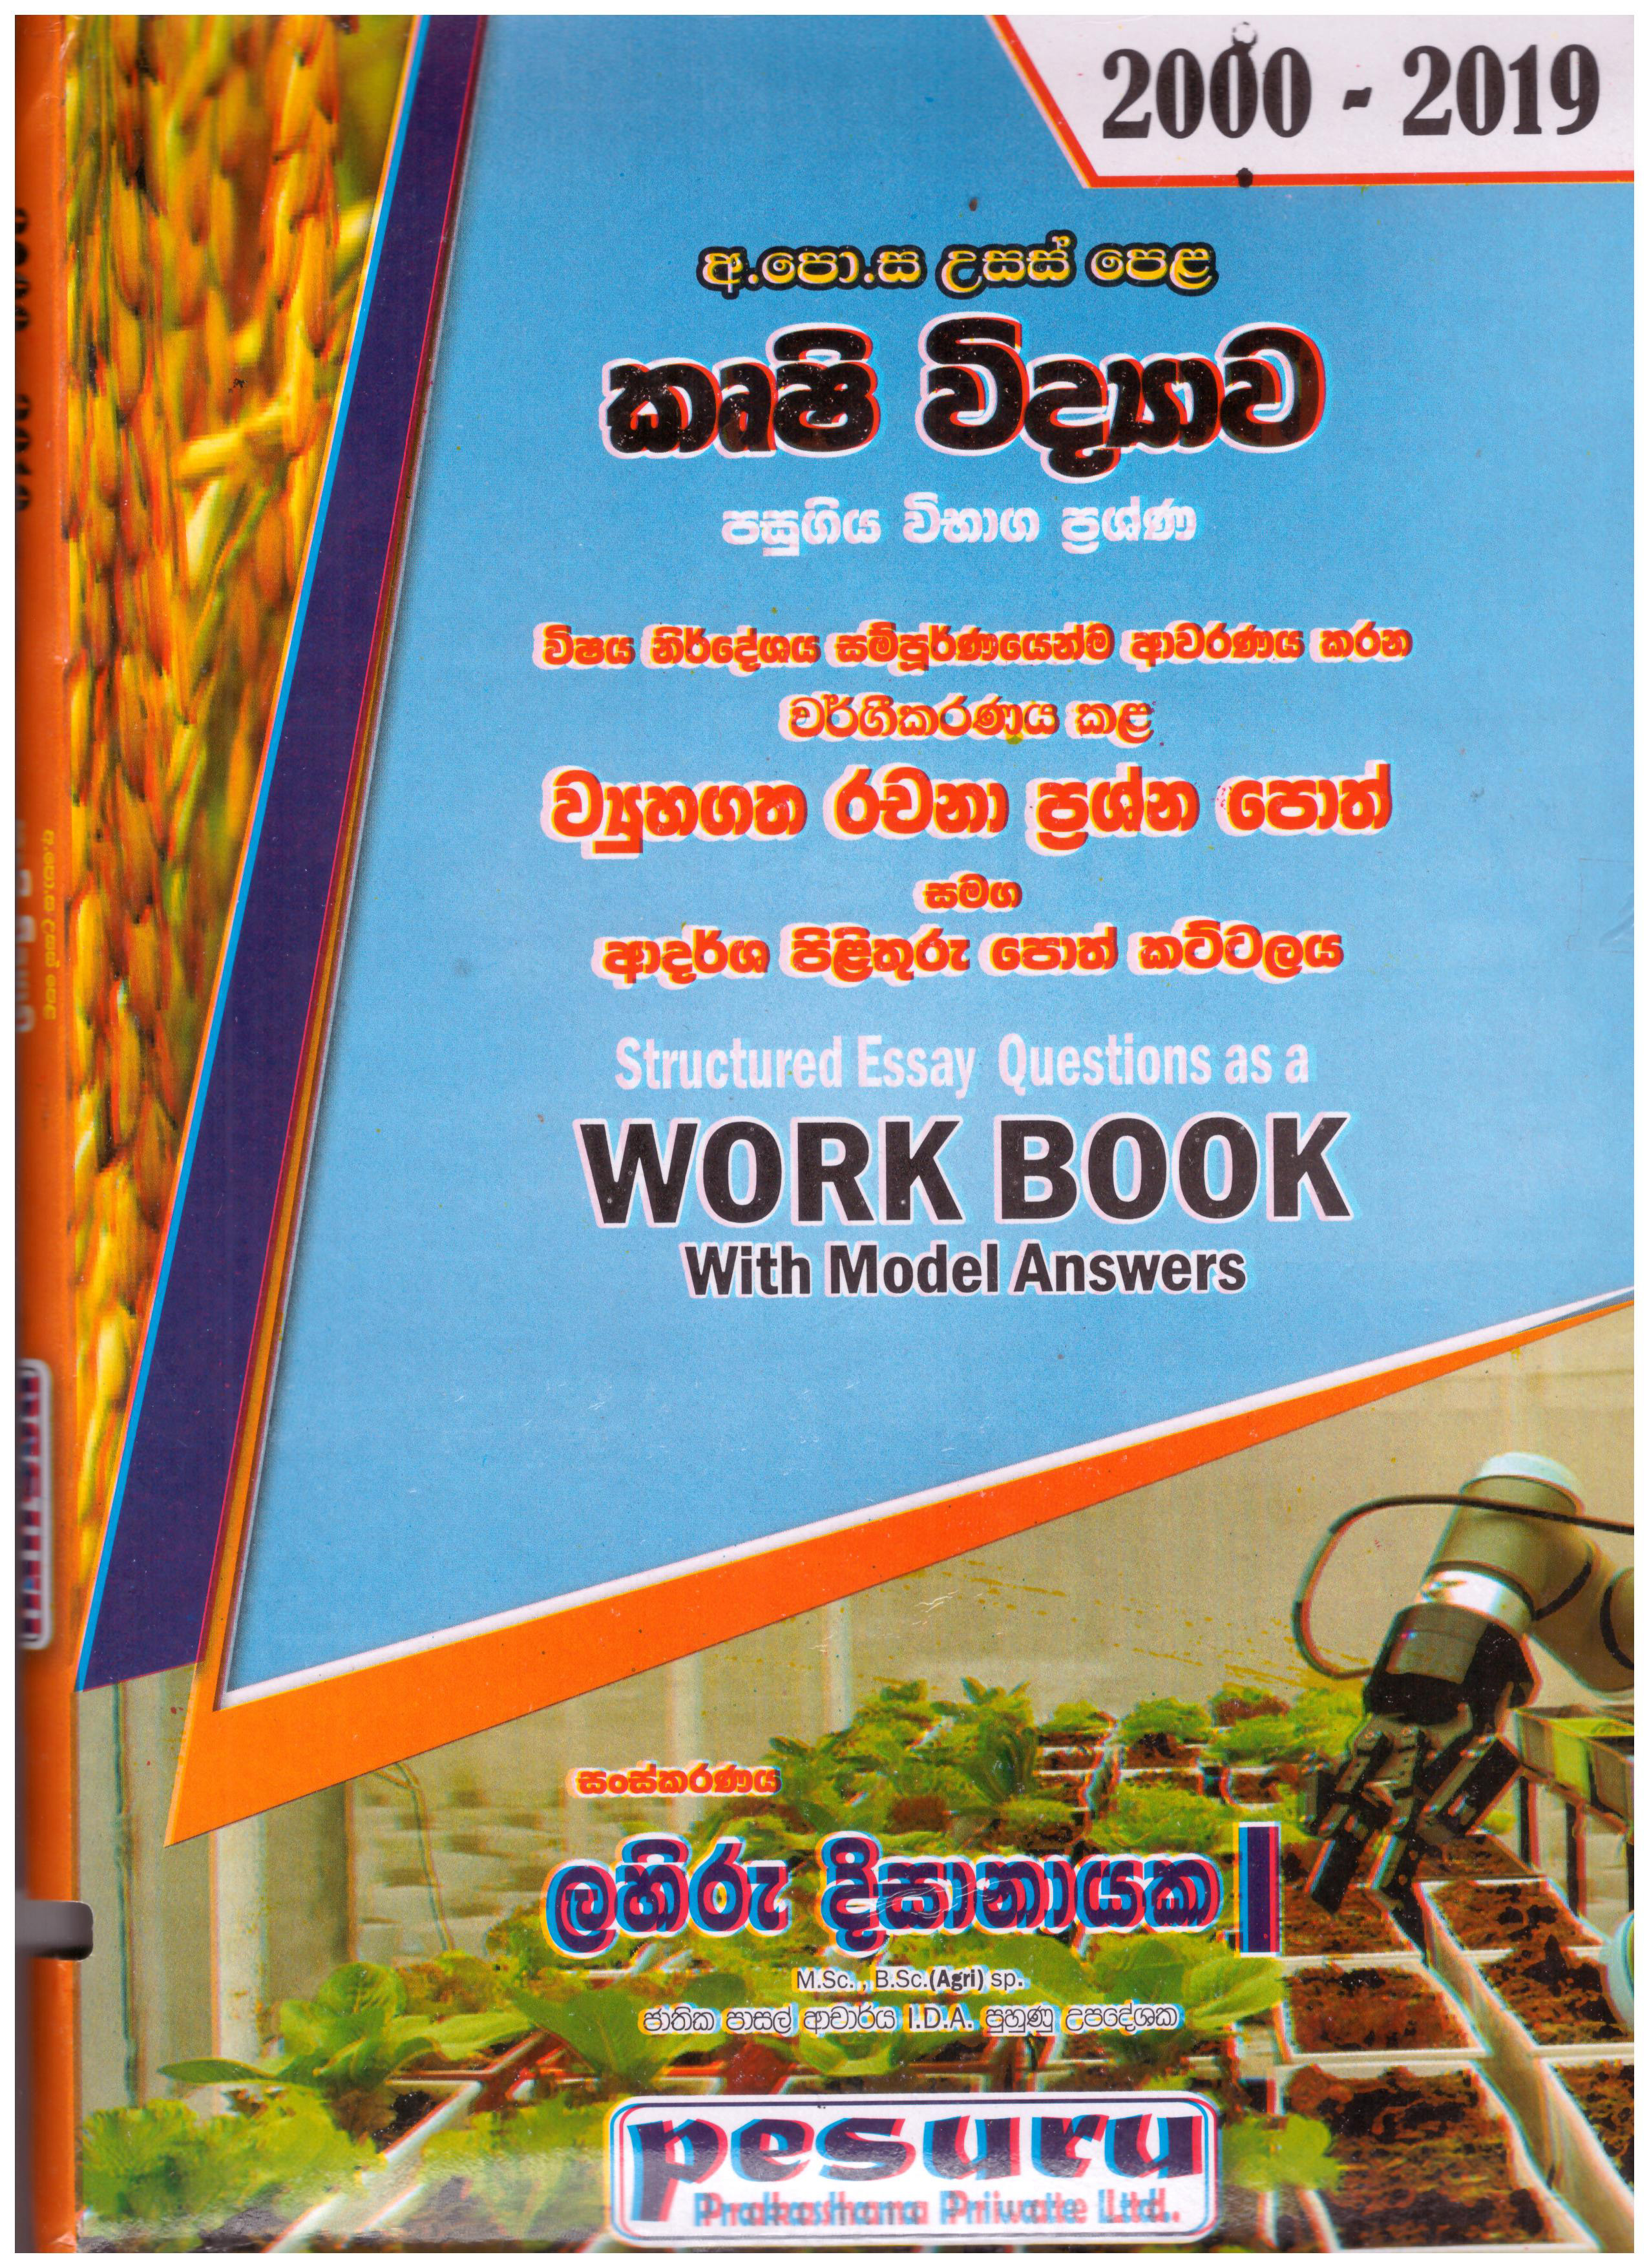 Pesuru A/L Agricultural Science : Structured Essay Questions as a Work Book with Model Answers 2000 - 2019 (Sinhala Medium)